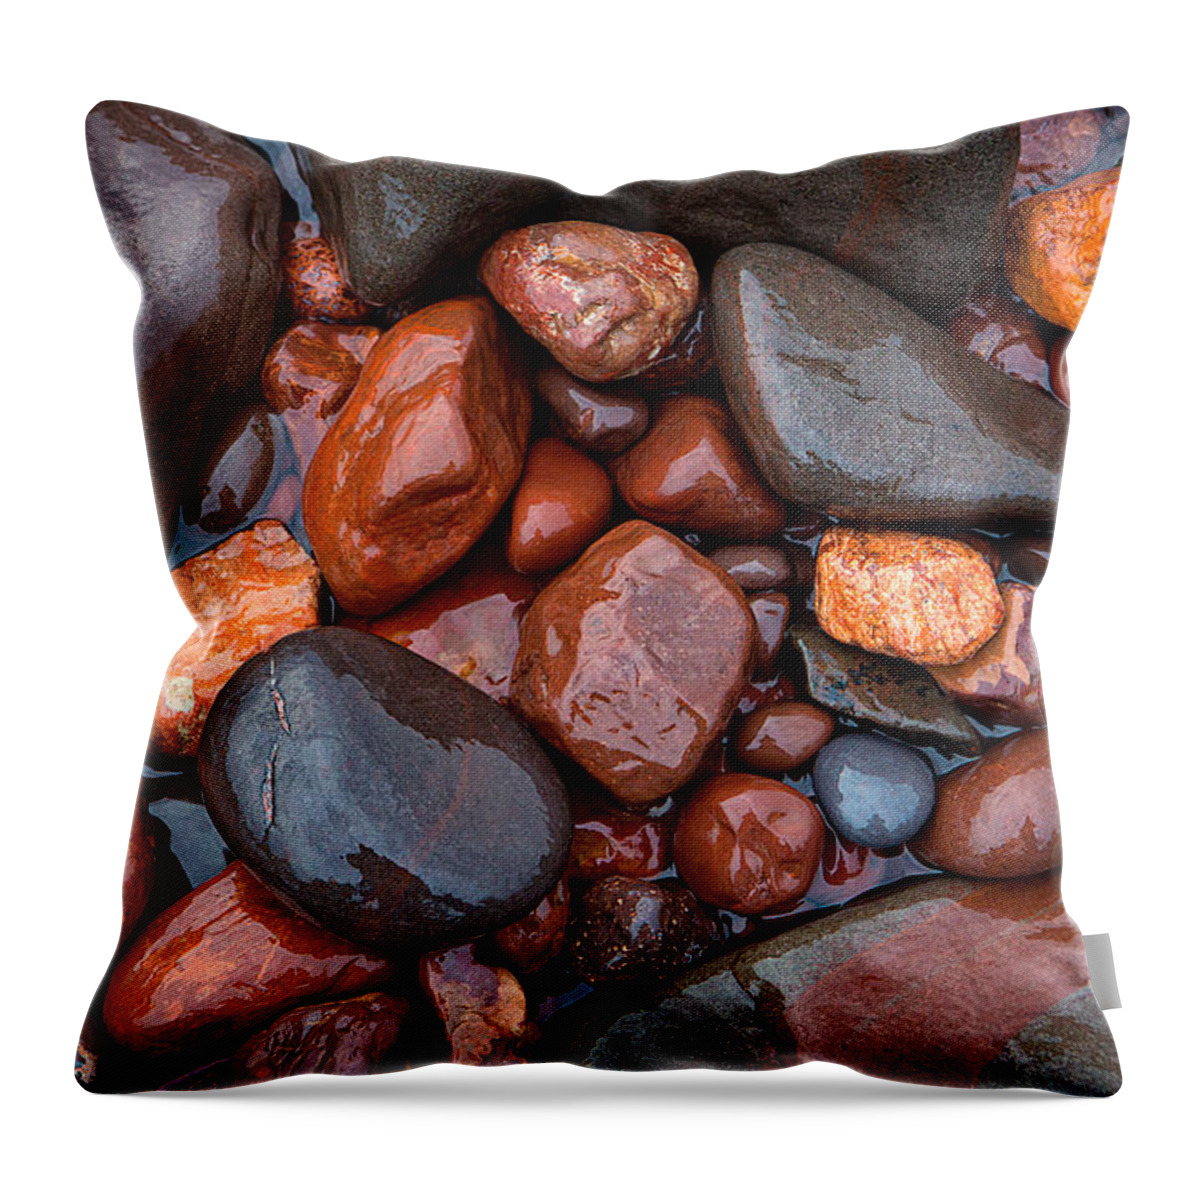 Steve White Throw Pillow featuring the photograph Lake Superior Gems by Steve White